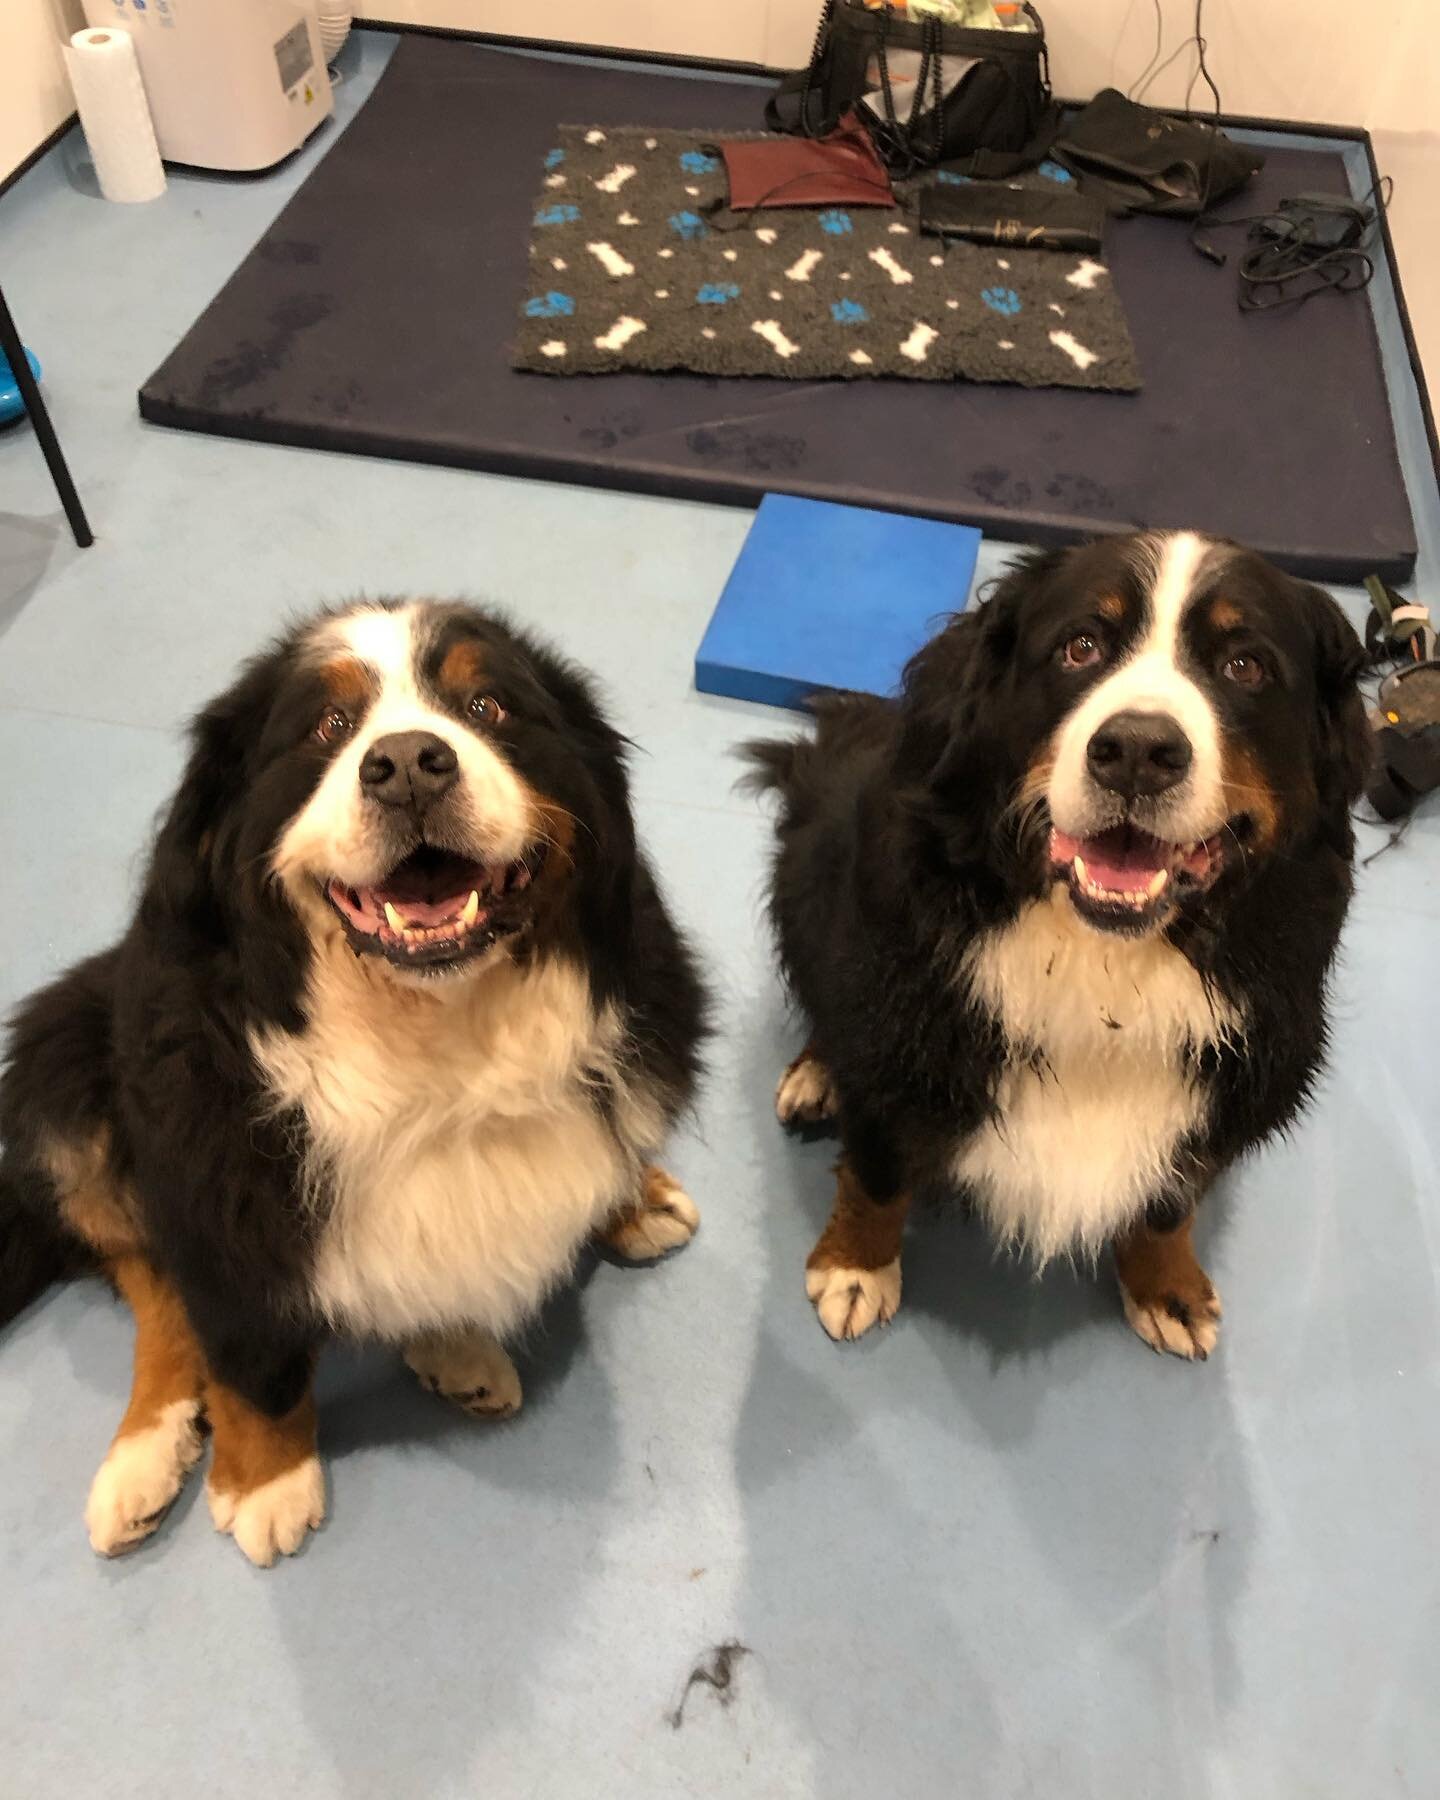 Bentley and Sadie being 2 very good bears for their physio sessions today 🐻🐾

#bernesemountaindog #vetphysio #veterinaryphysiotherapy #norfolk